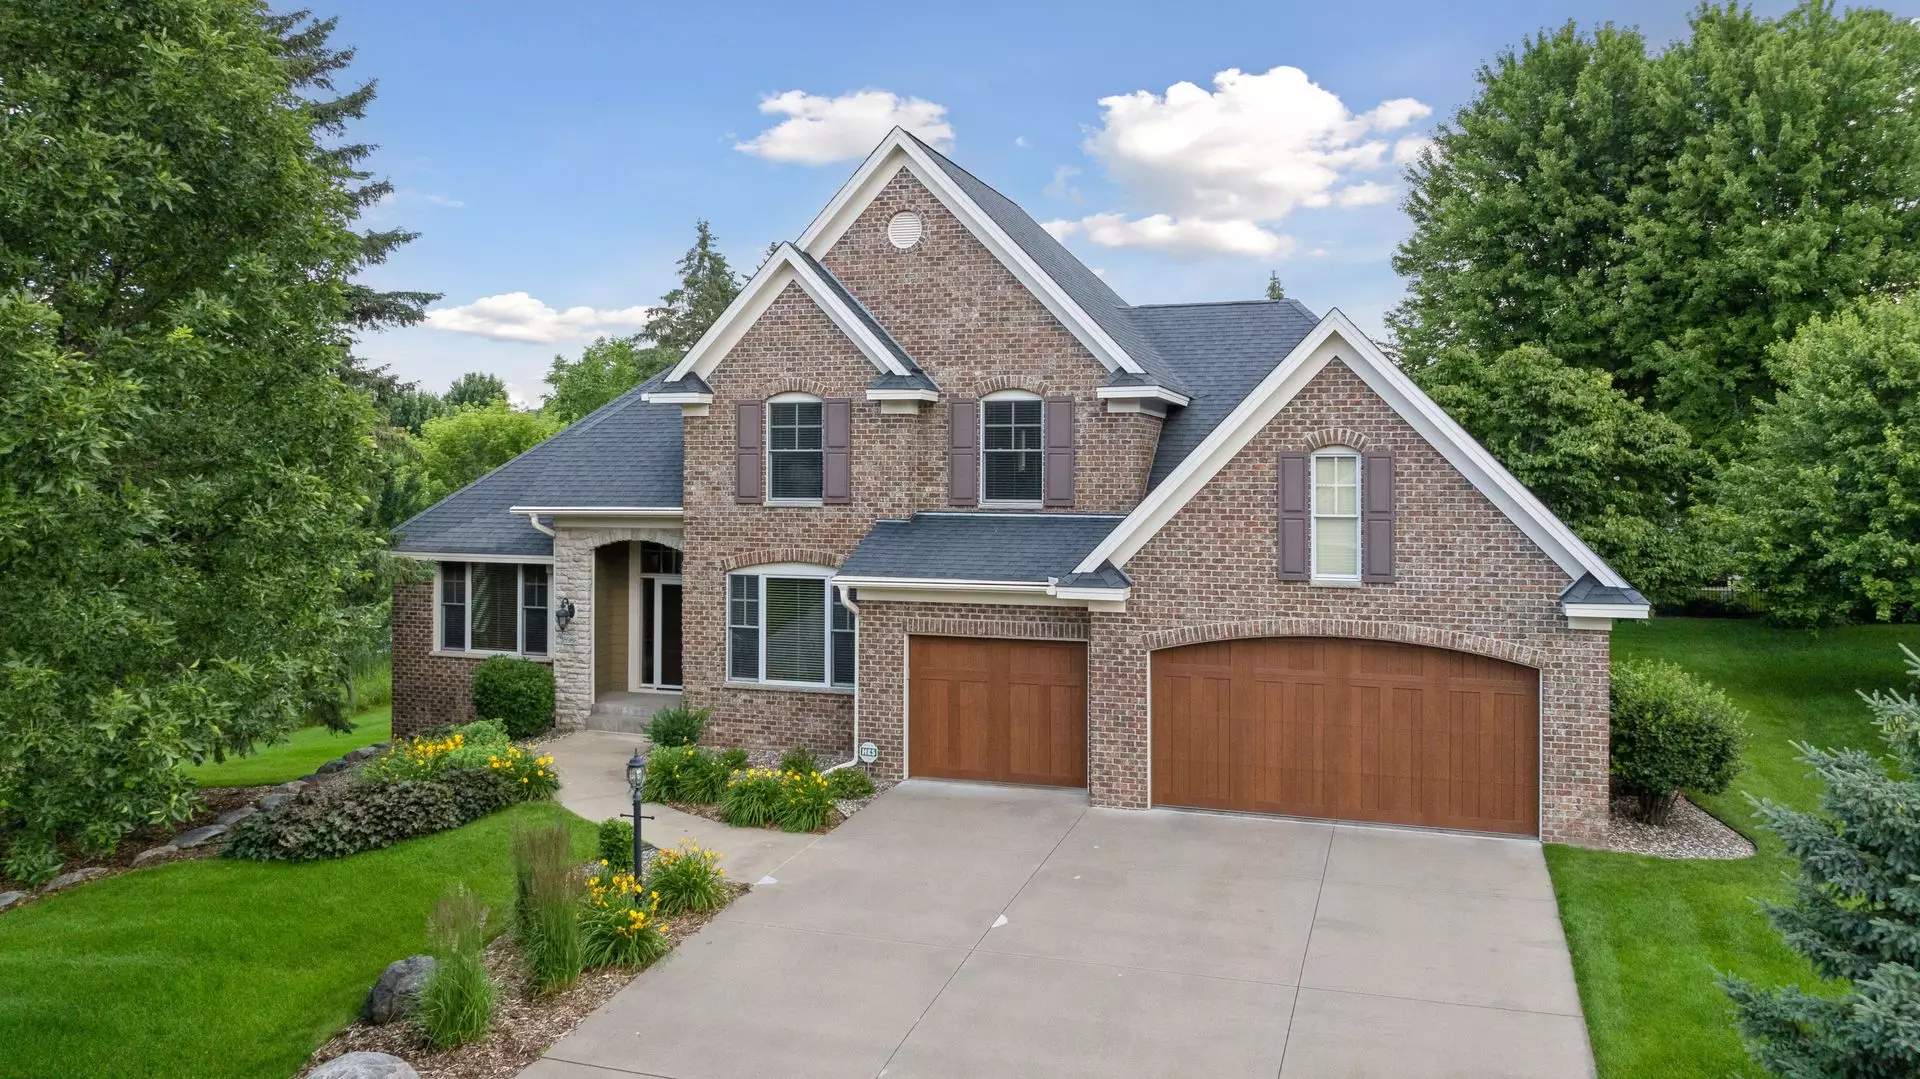 New home construction for sale at 8986 Springwood Drive, Woodbury